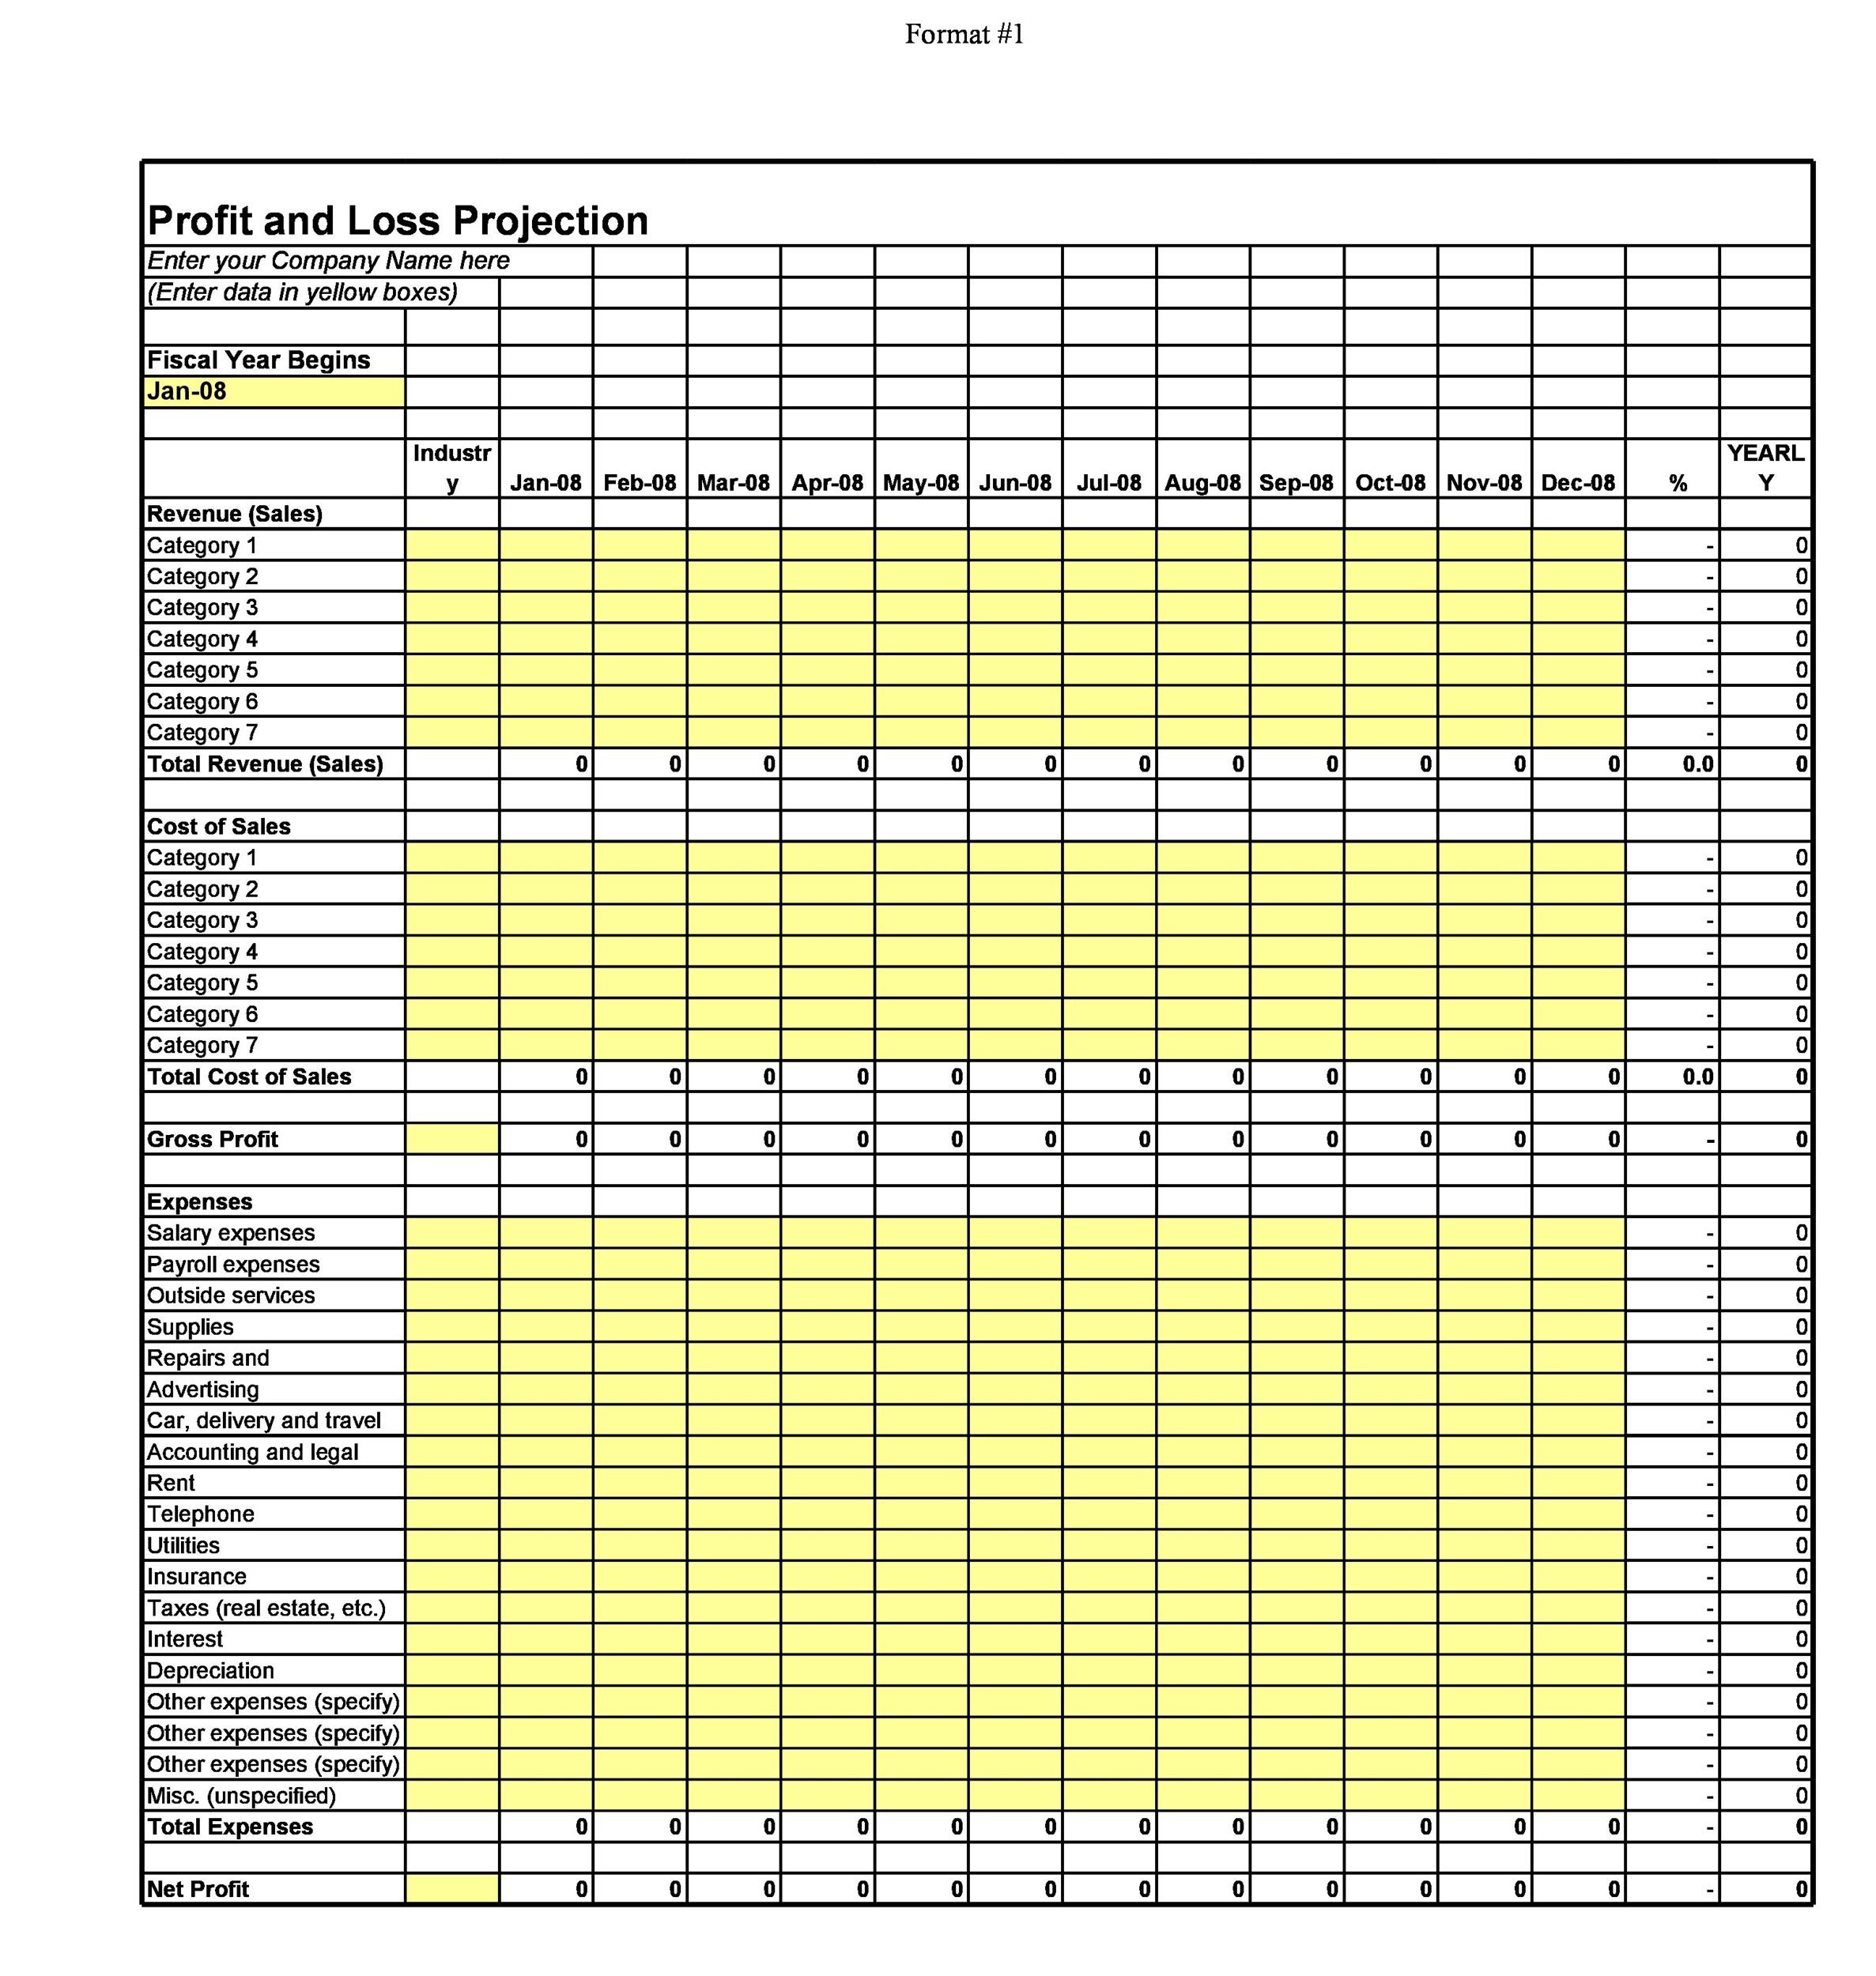 Free Profit and Loss Statement Template 22